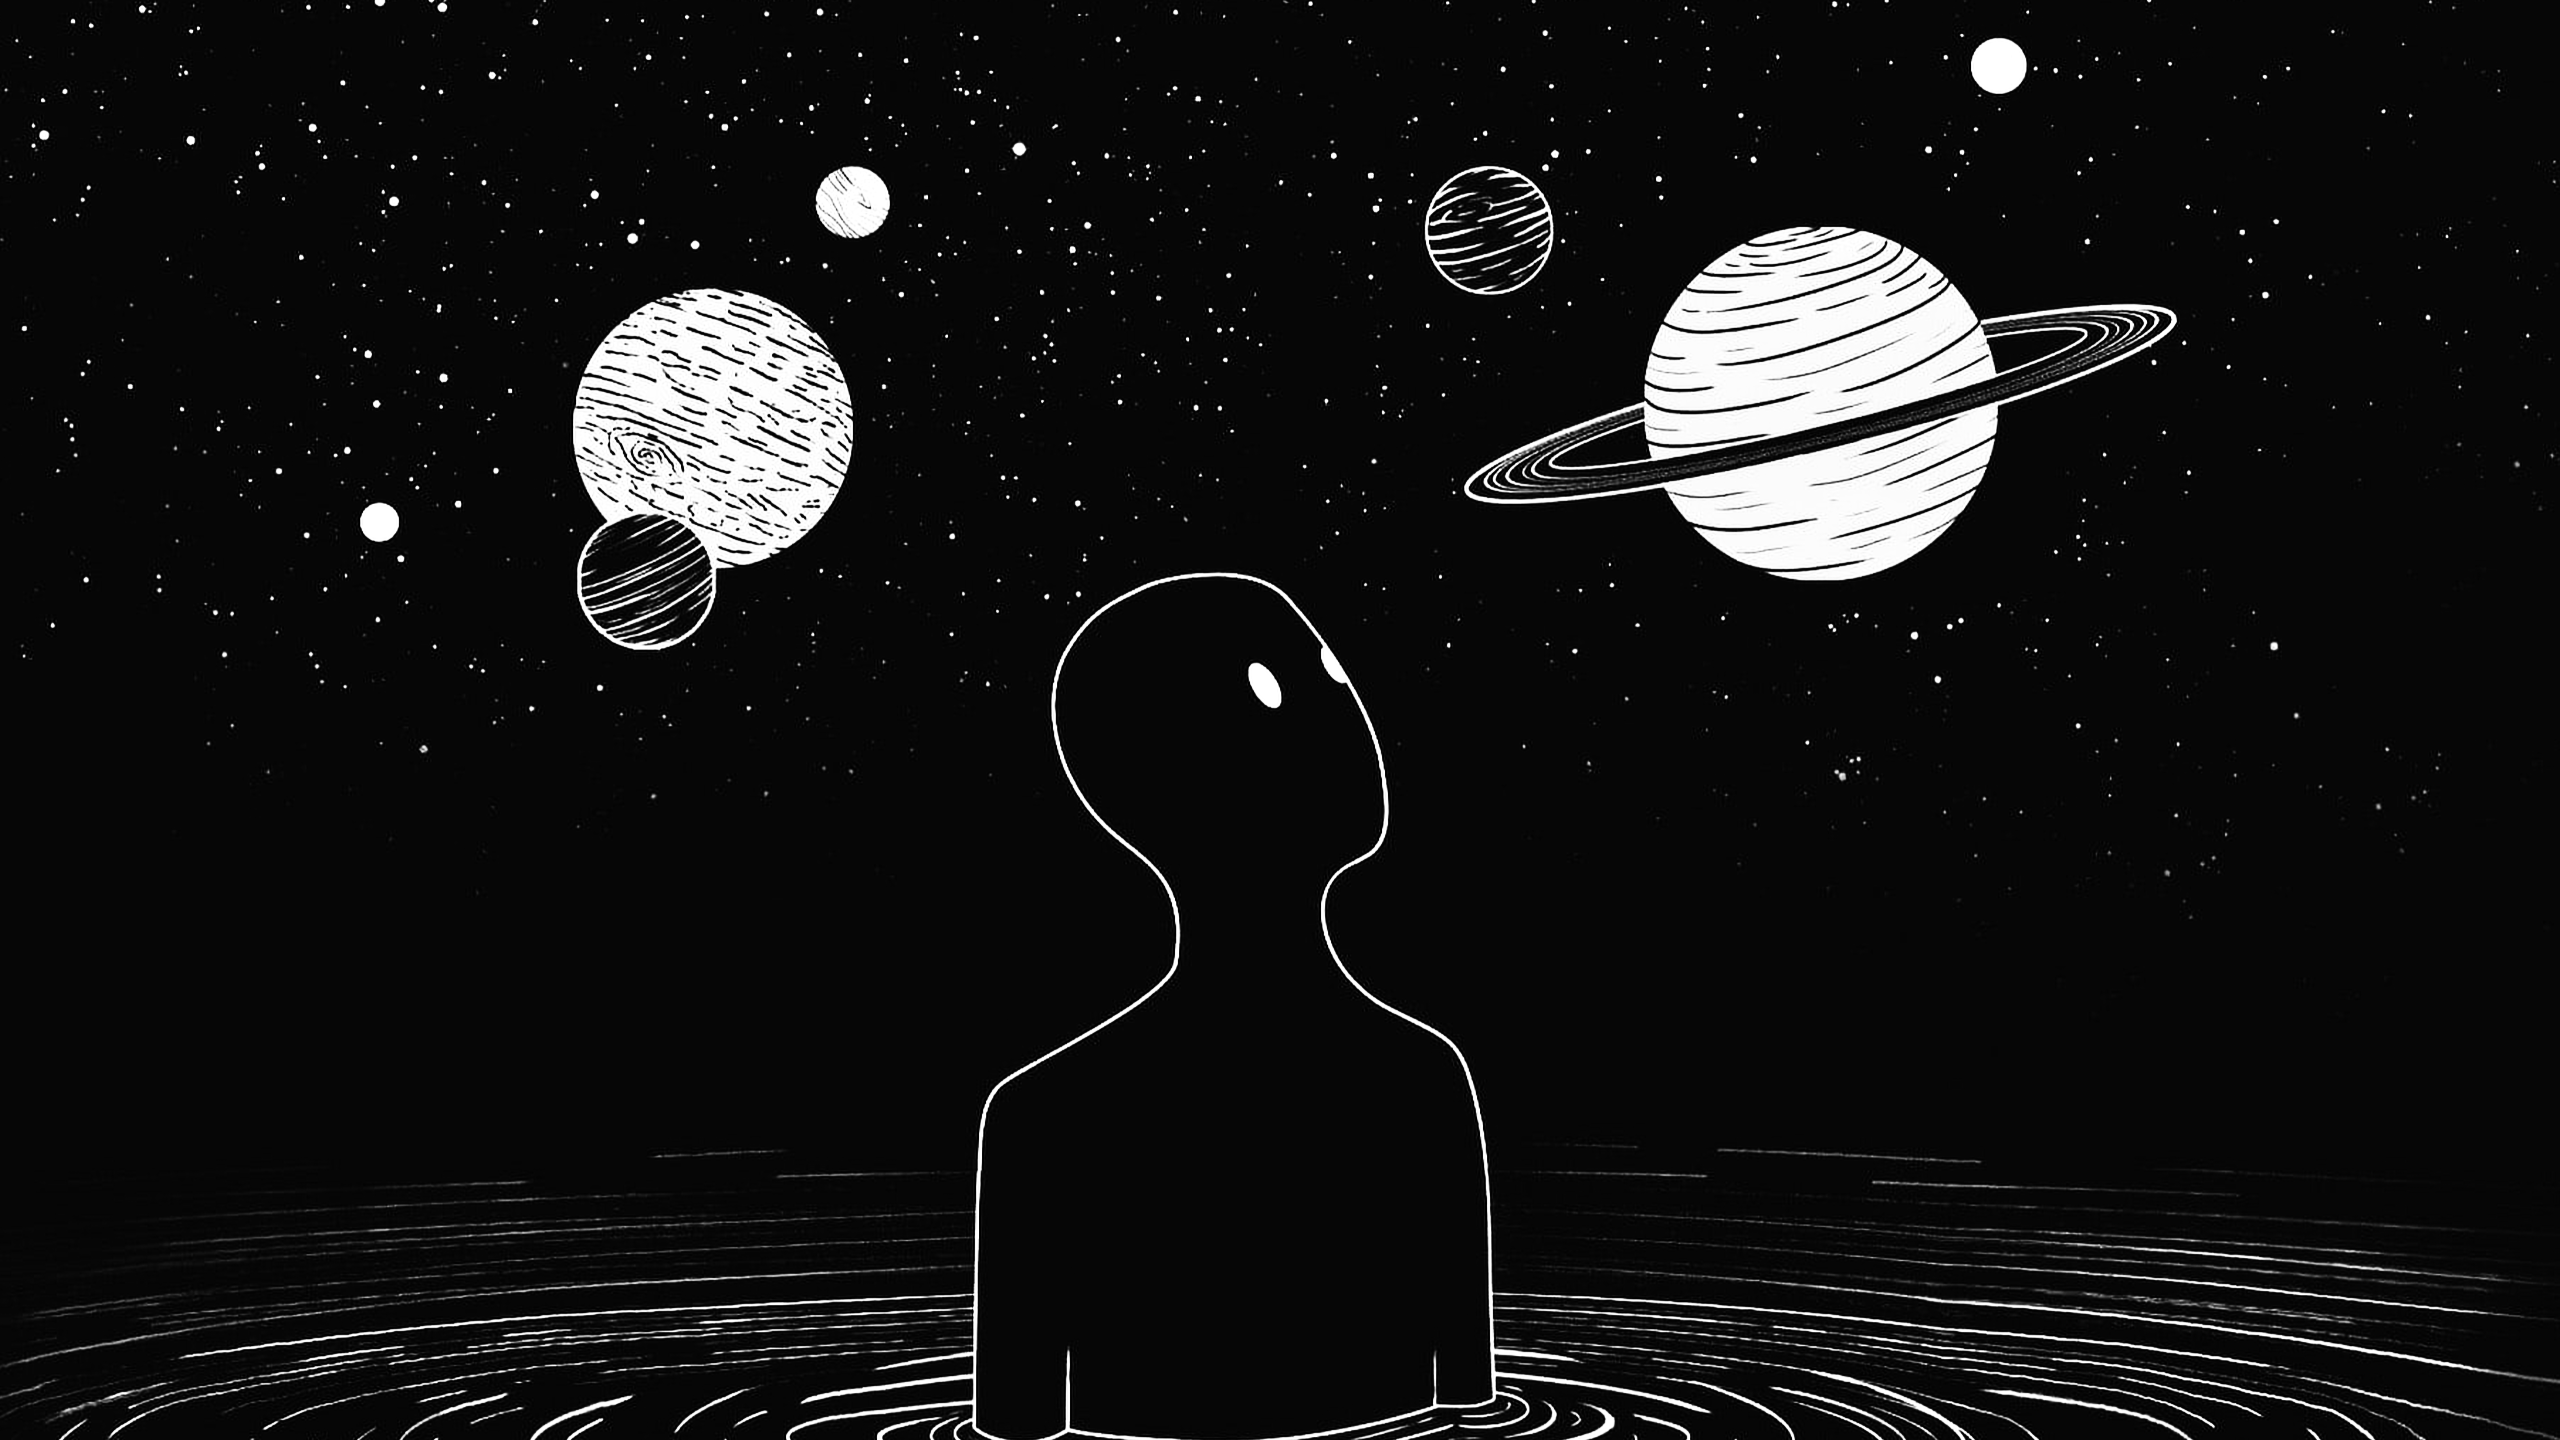 A person looking at the stars and planets - 2560x1440, black and white